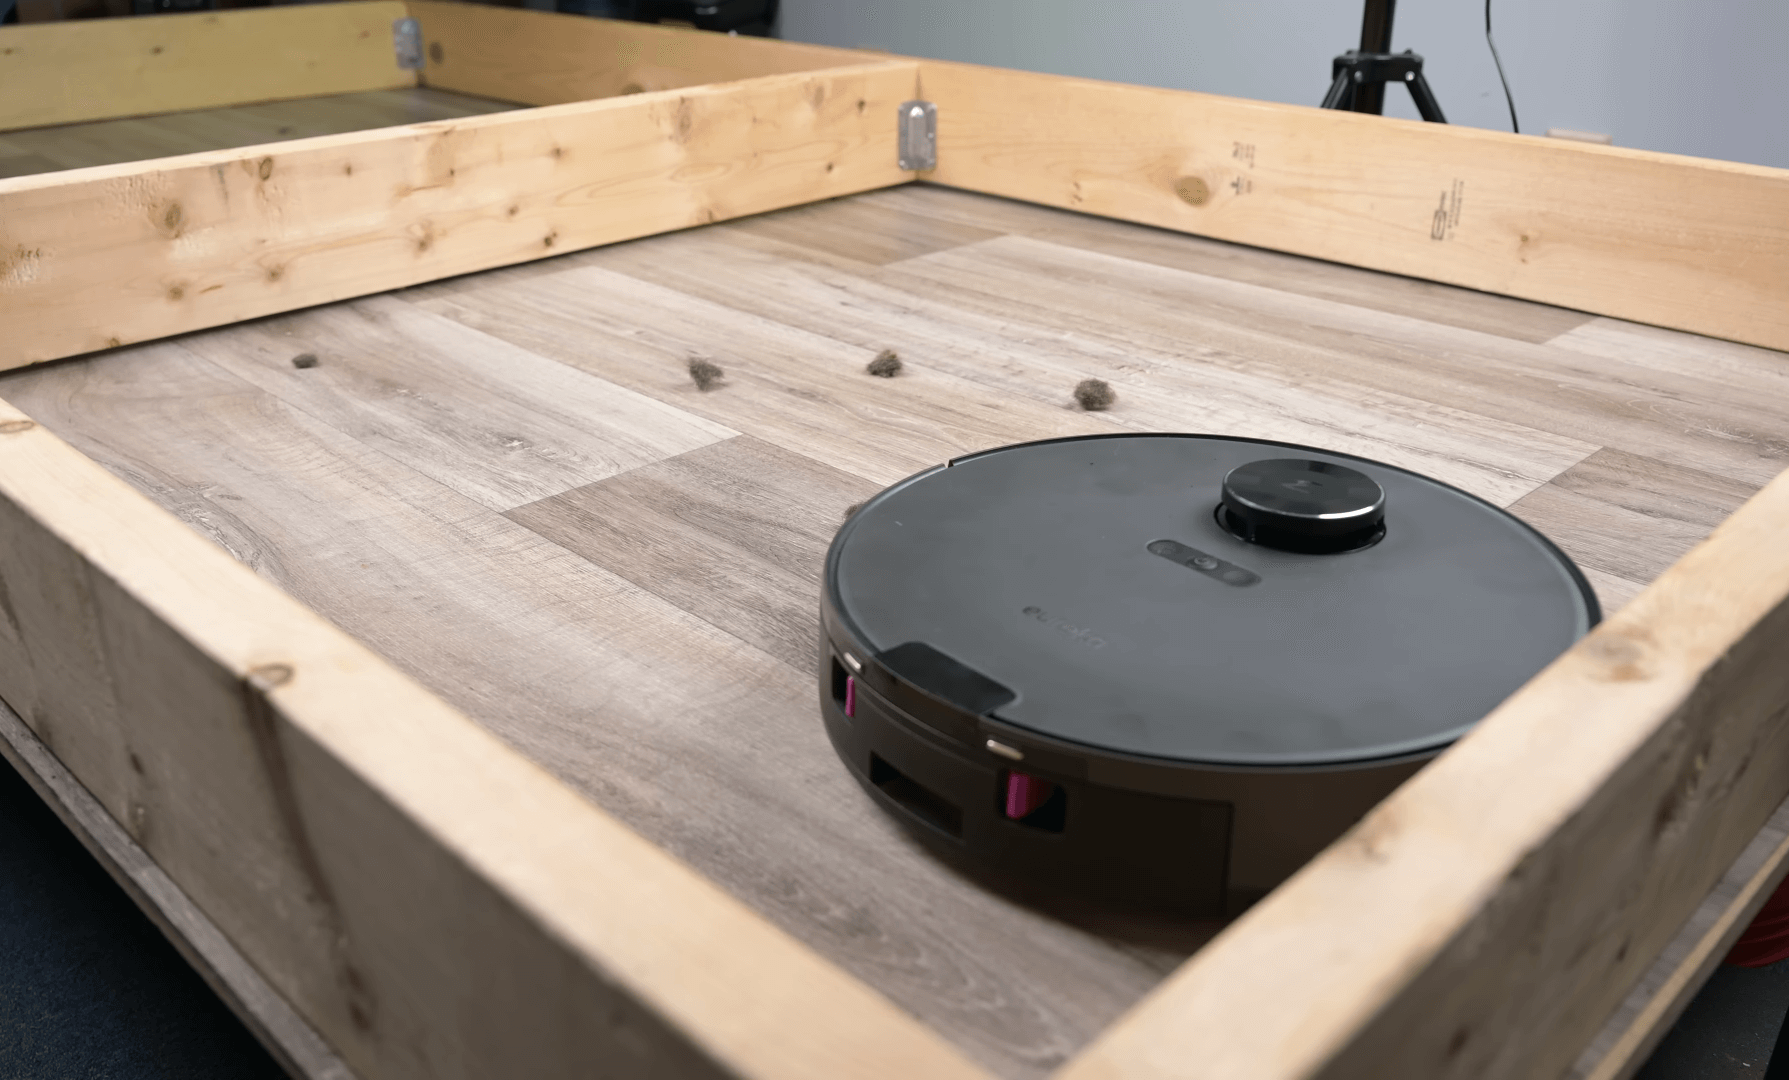 A black Eureka E10S robotic vacuum cleaner is in the middle of a wooden floor with a noticeable amount of hair around it